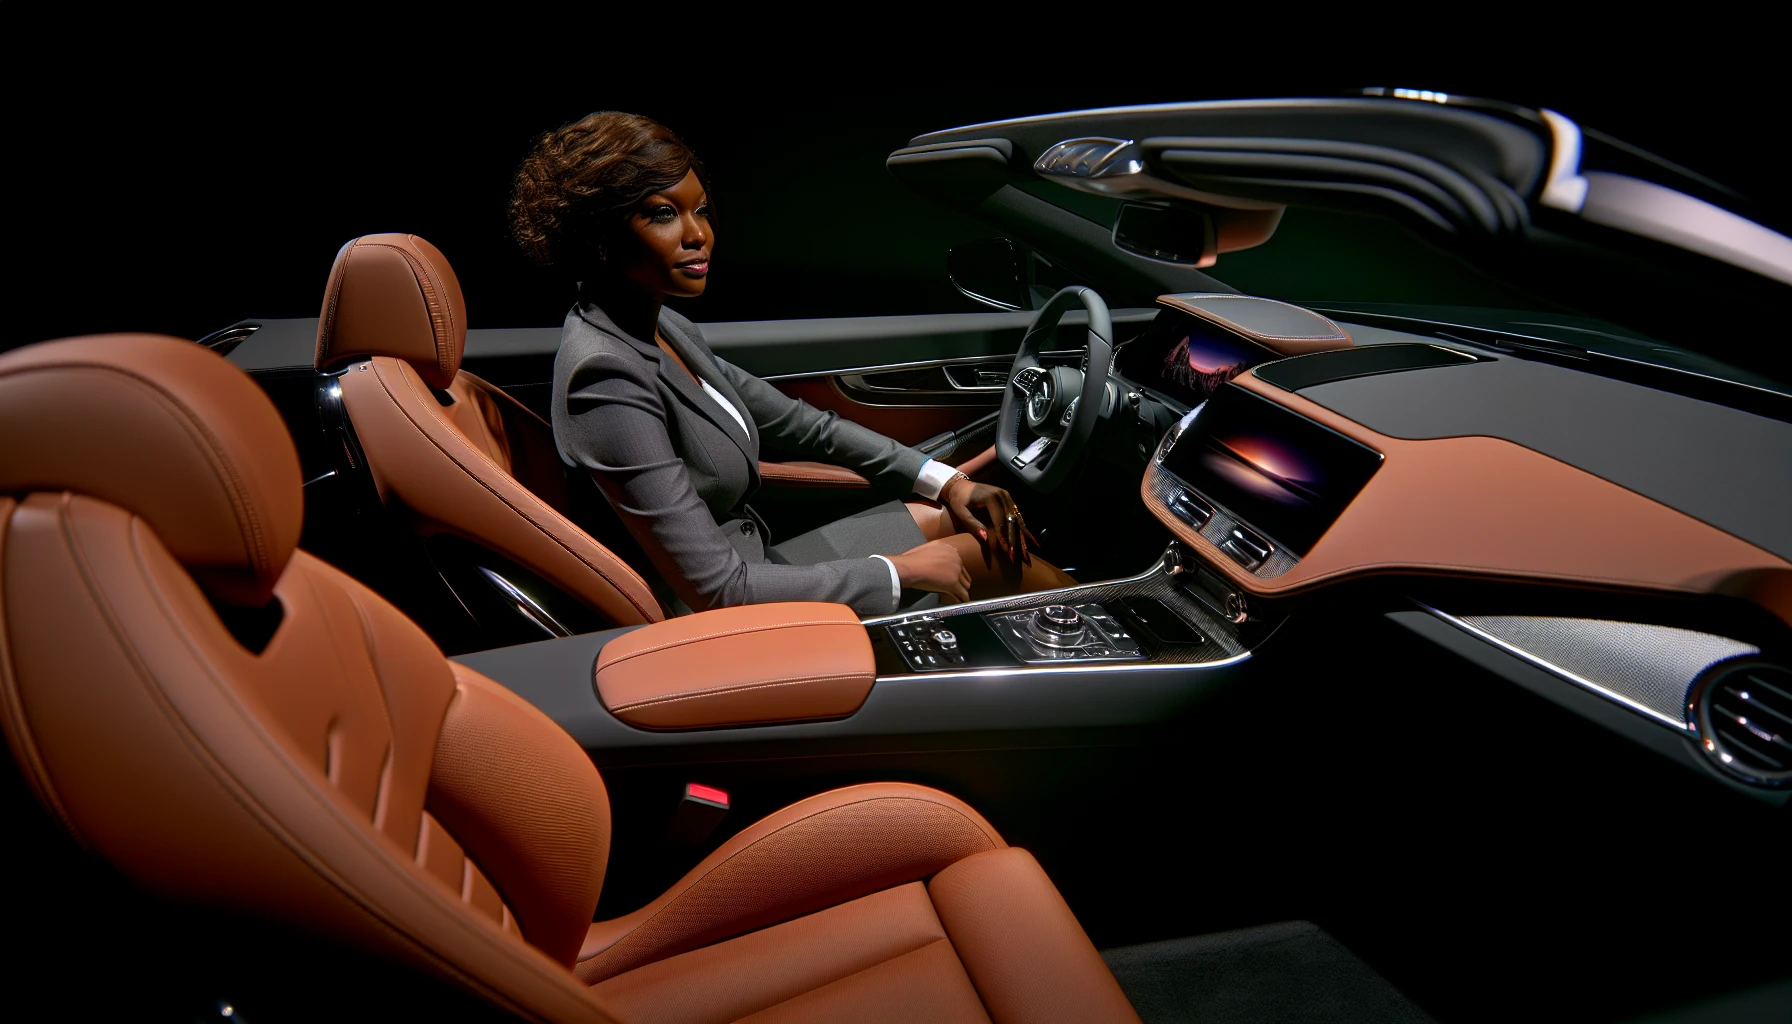 Luxurious interior of a BMW convertible with advanced technology